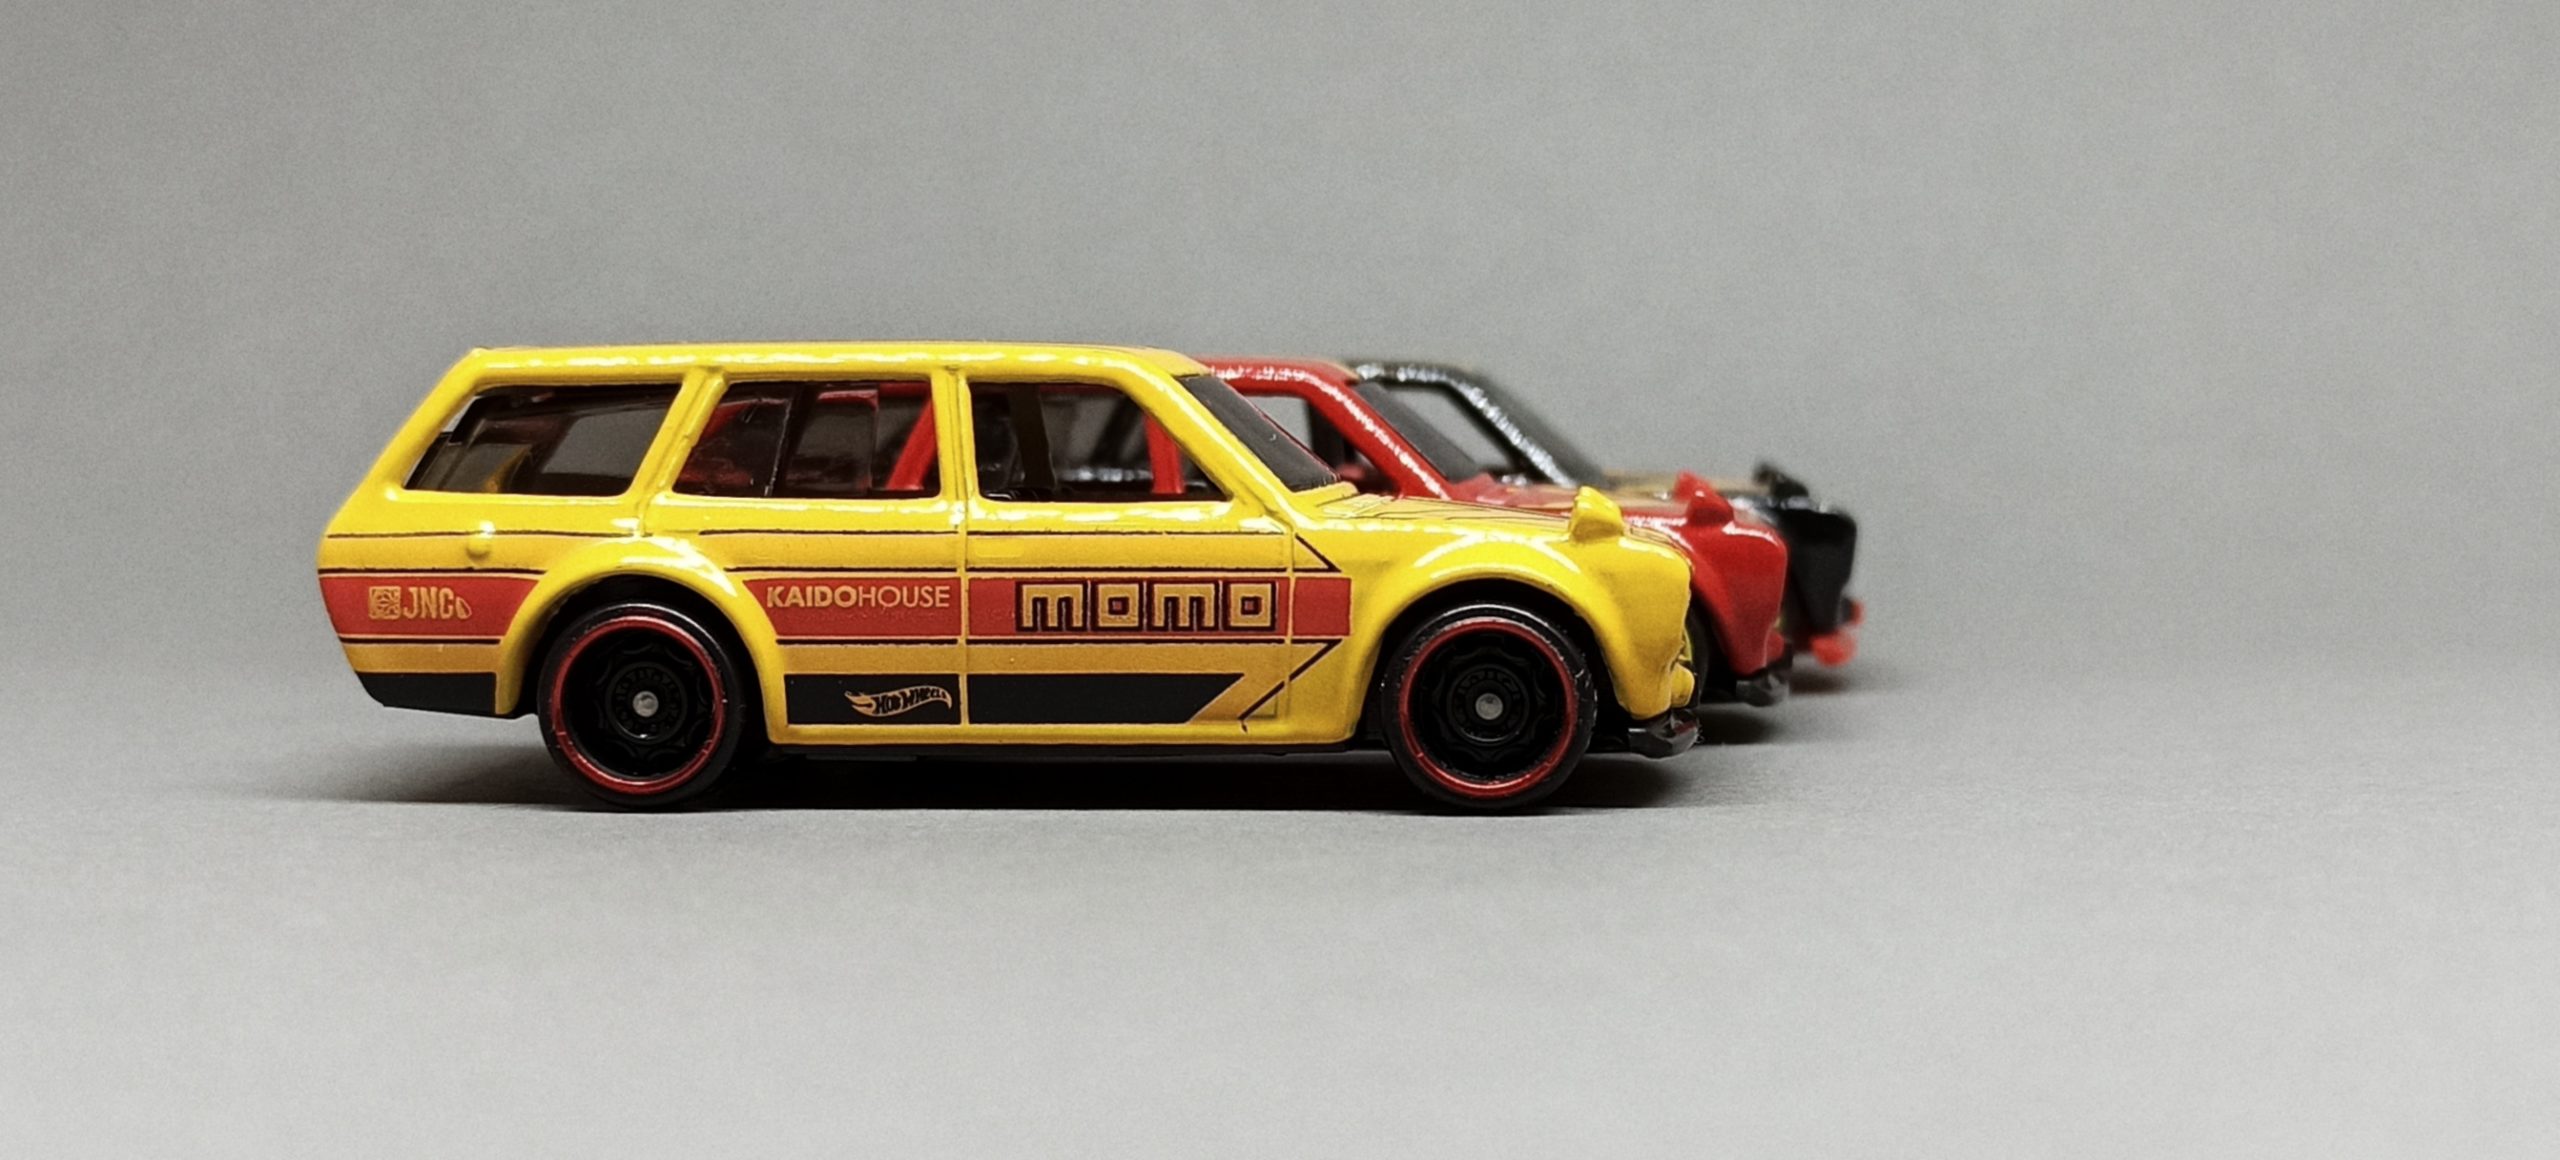 Hot Wheels '71 Datsun Bluebird 510 Wagon (GHG57) 2020 (146/250) HW Speed Graphics (8/10) black red yellow (Kroger Exclusive) collection